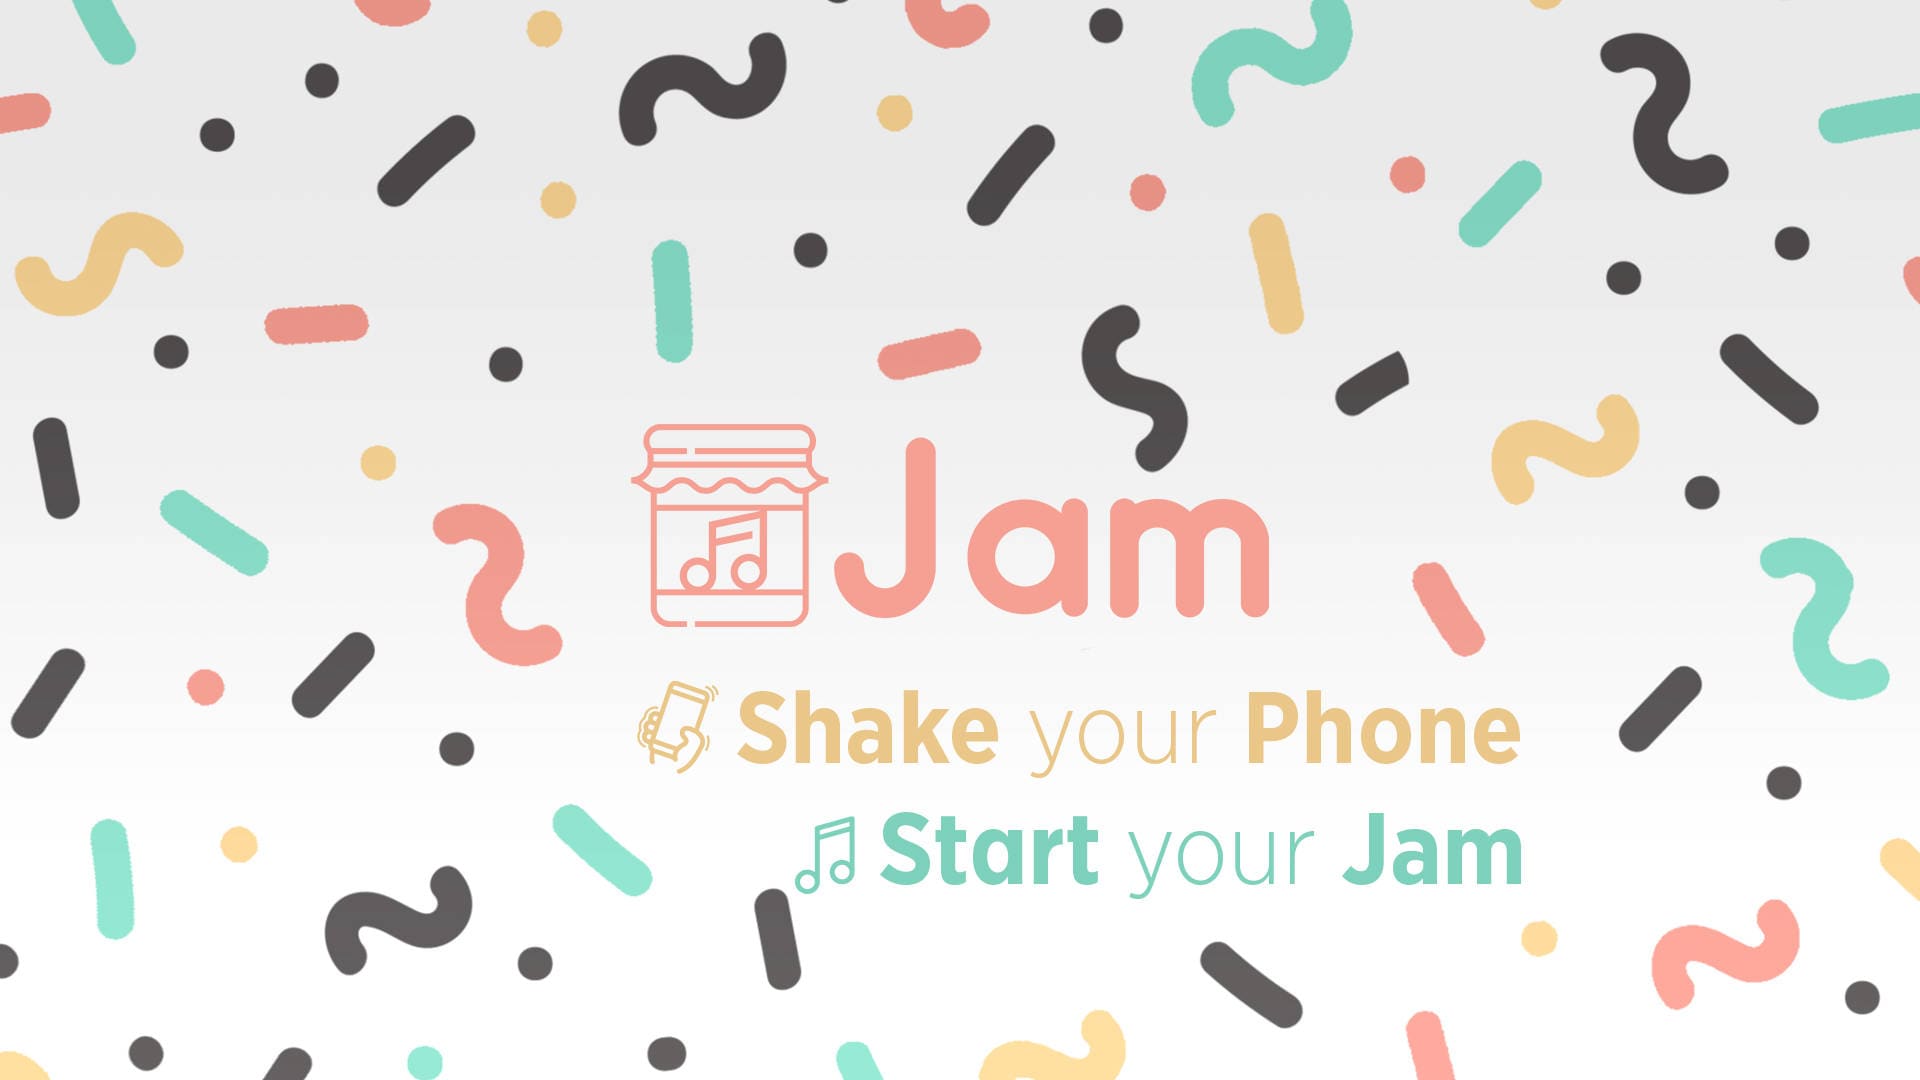 CLOCKBEATS SELECTS 30 ARTISTS TO IMPROVE THE SOUNDS OF "JAM"